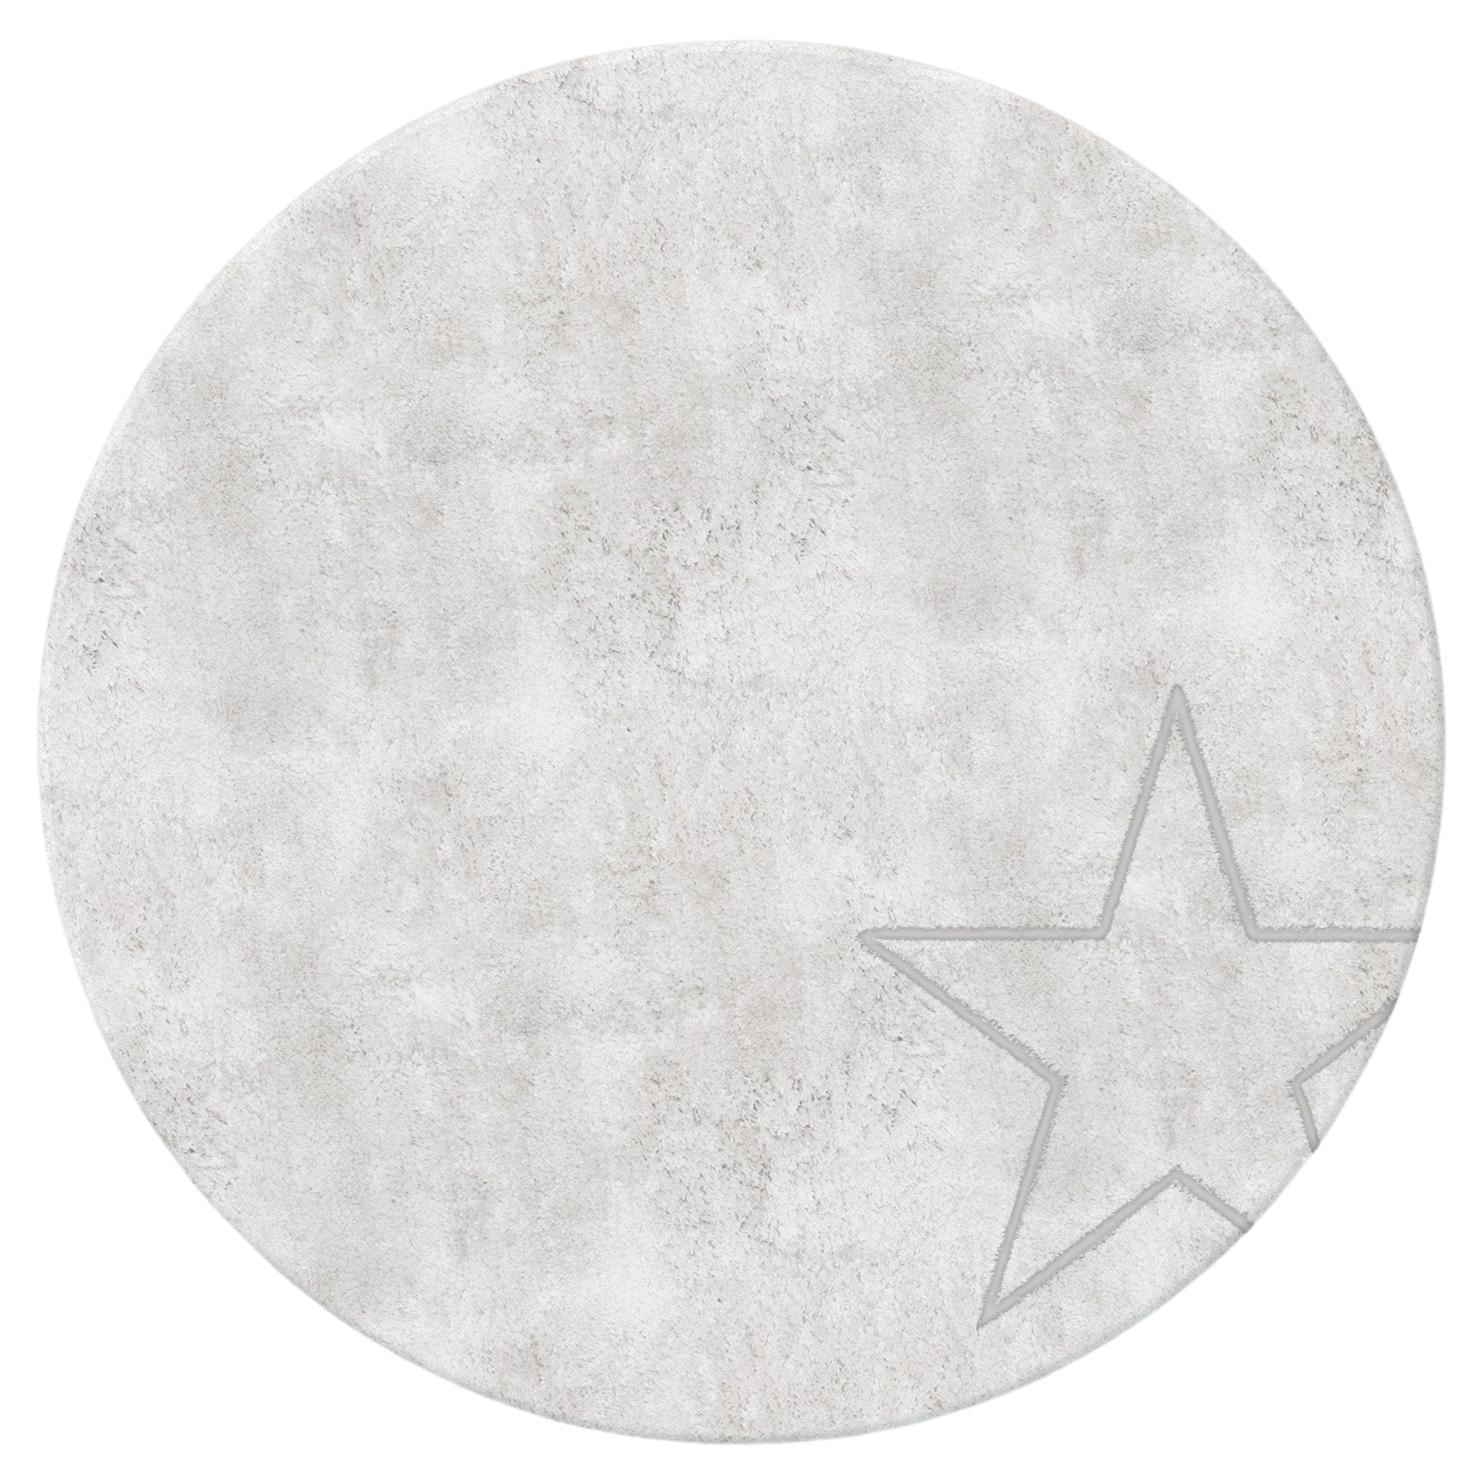 Want Hand-Tufted White Rug, Take Me Up Collection by Paolo Stella